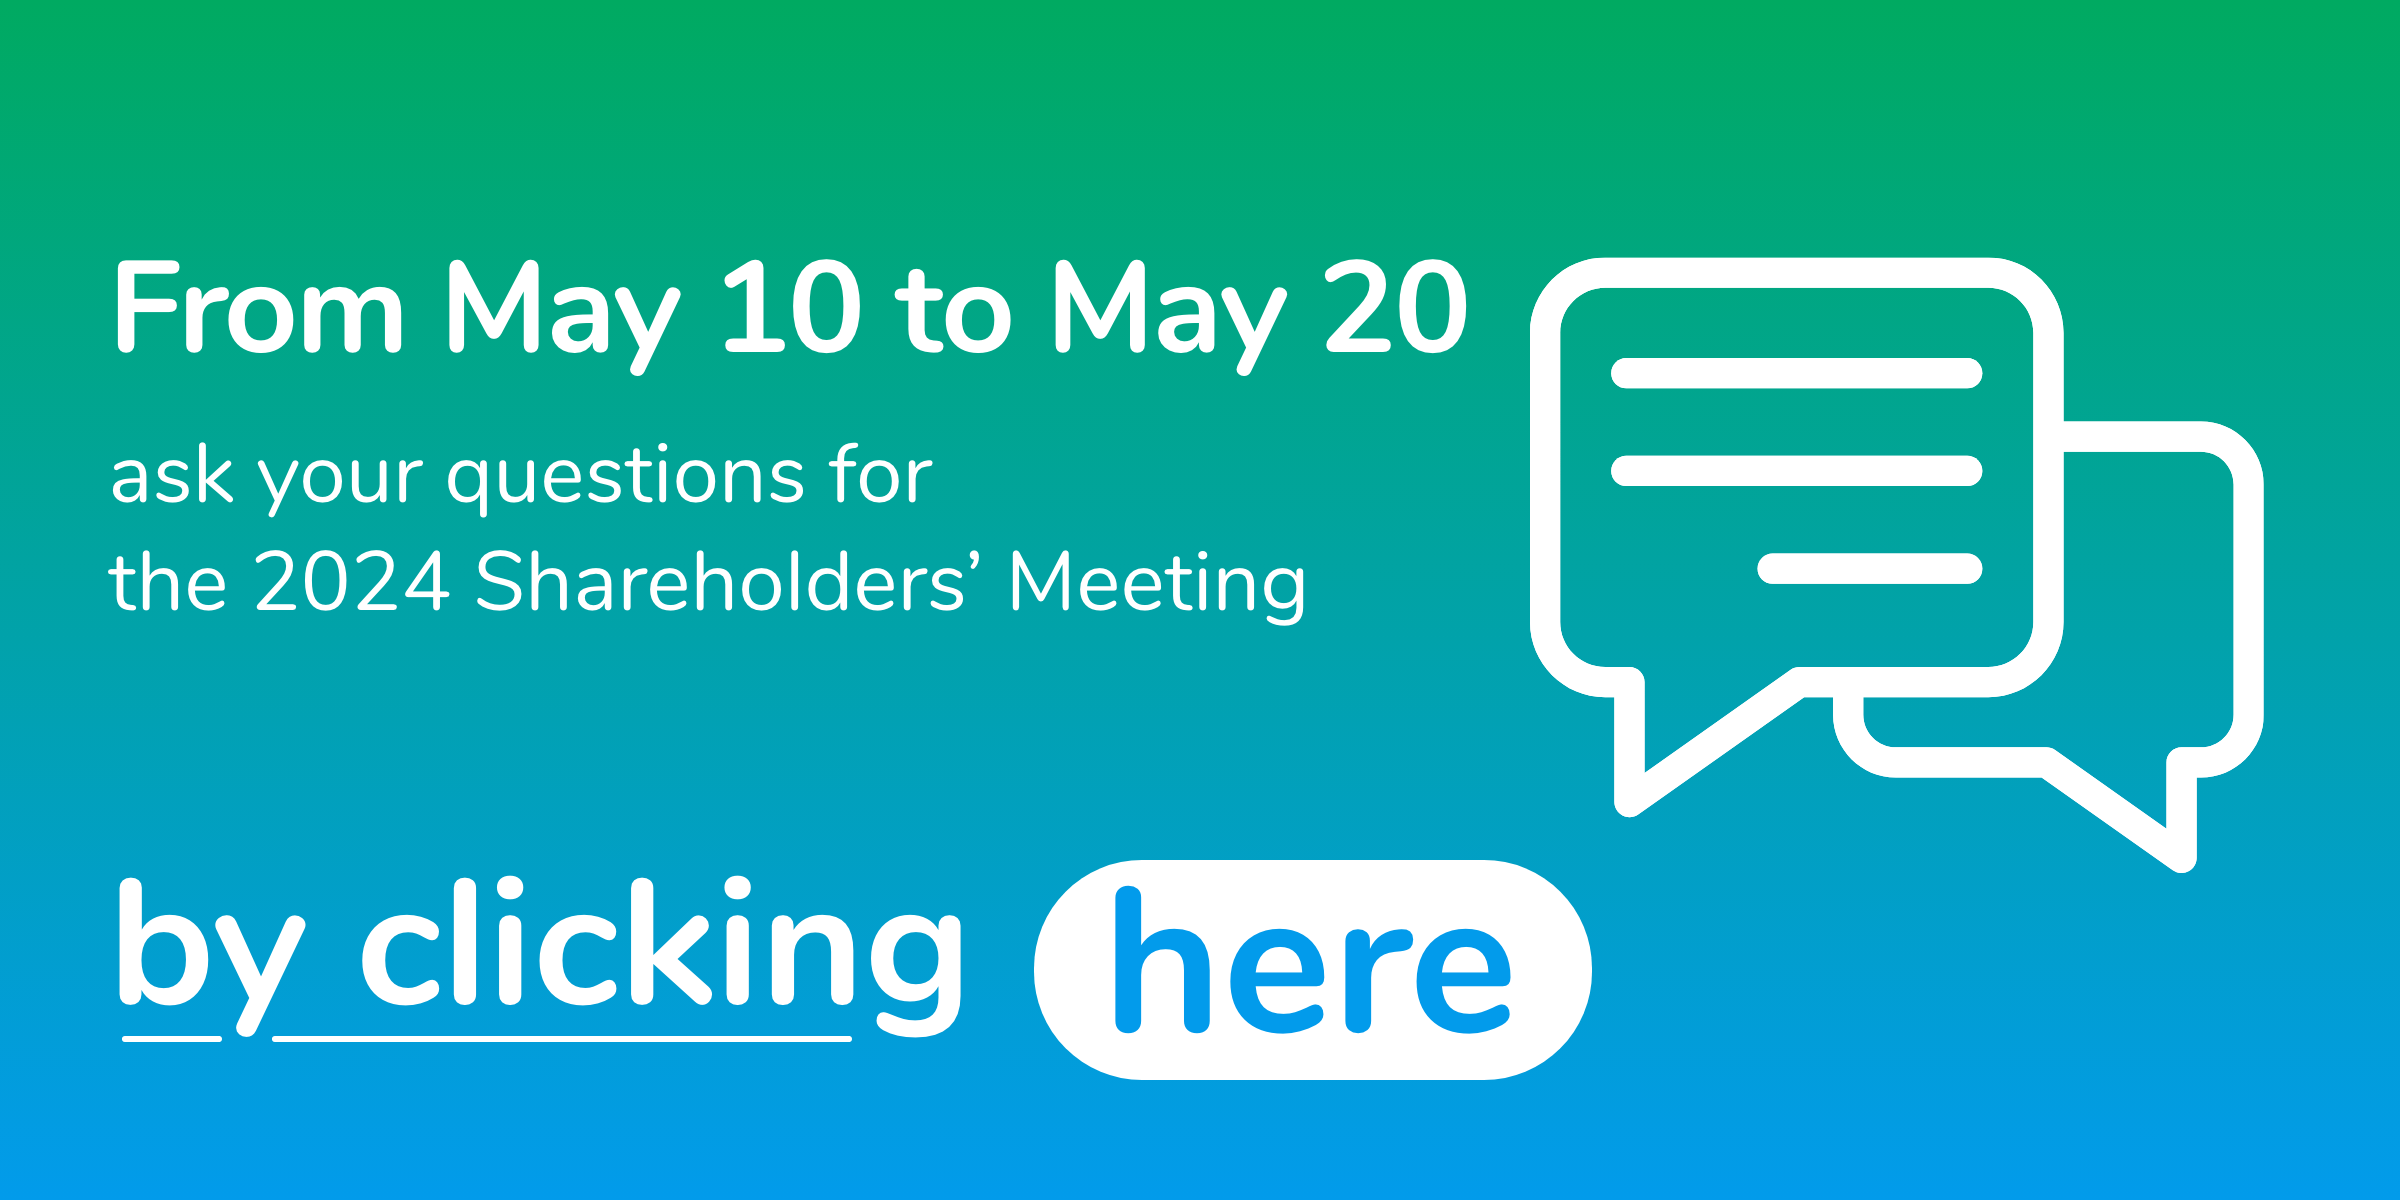 From May 10 to May 20 ask your questions for the 2024 Shareholders' Meeting by clicking here - access the platform